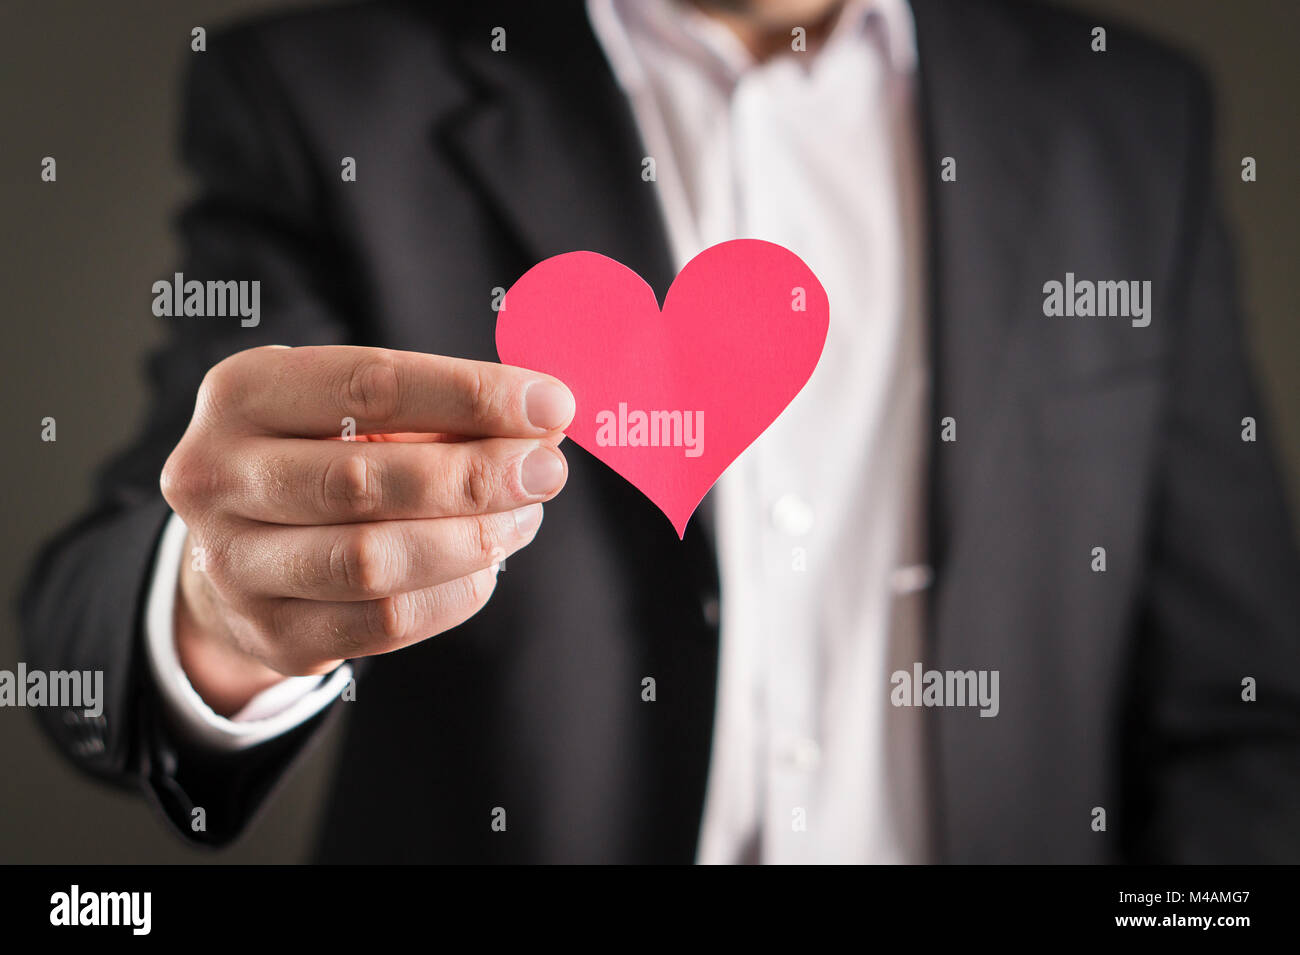 Man in a suit and a cardboard paper heart. Businessman or fiance with a love symbol. Proposal, wedding, dating or valentine's day concept. Stock Photo